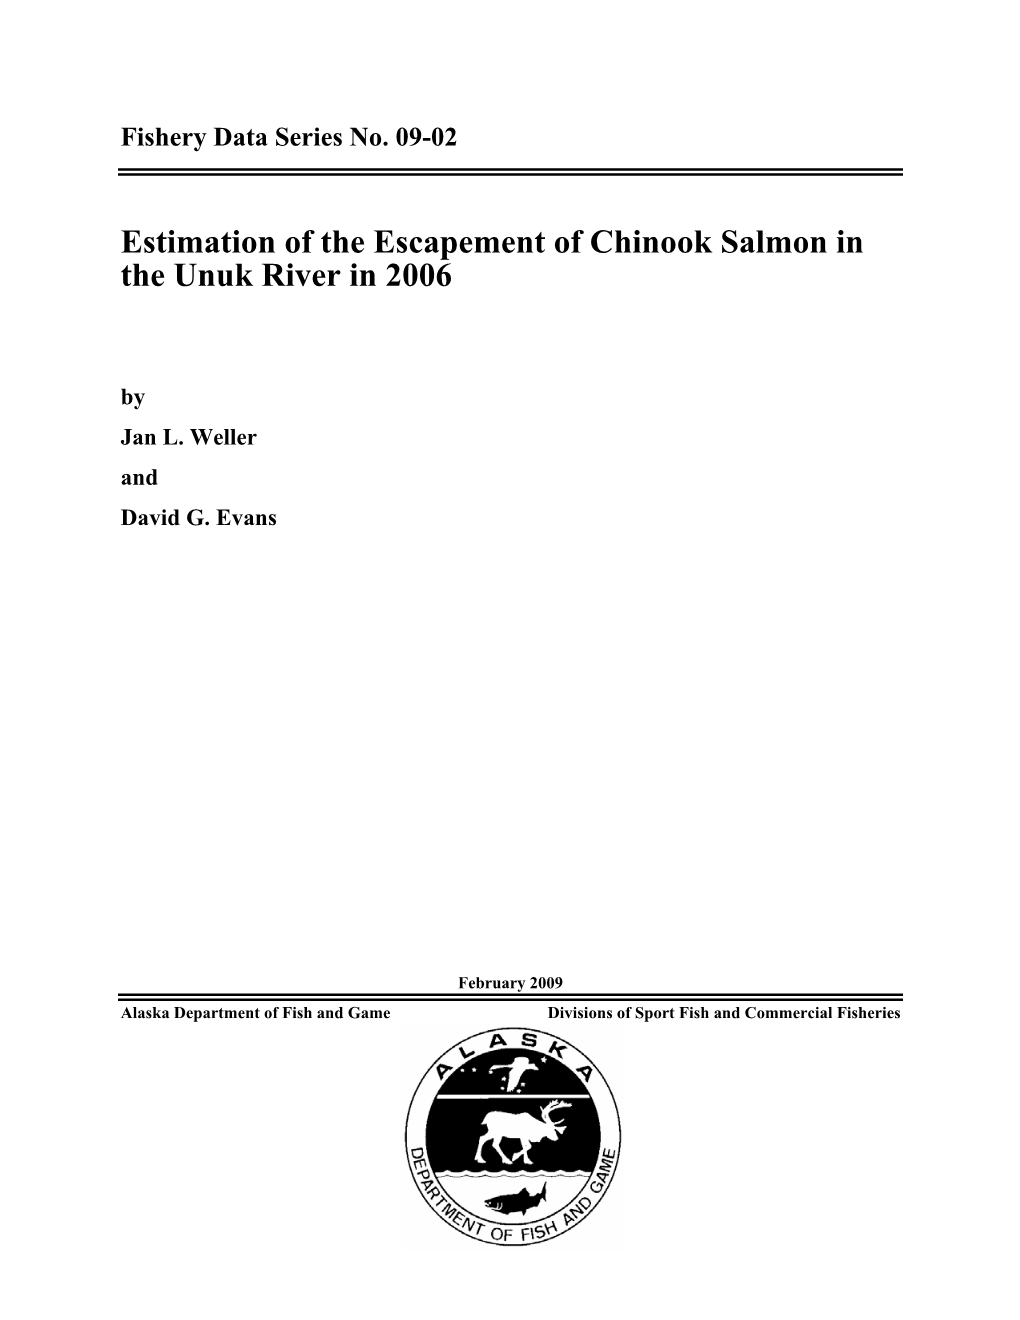 Estimation of the Escapement of Chinook Salmon in the Unuk River in 2006